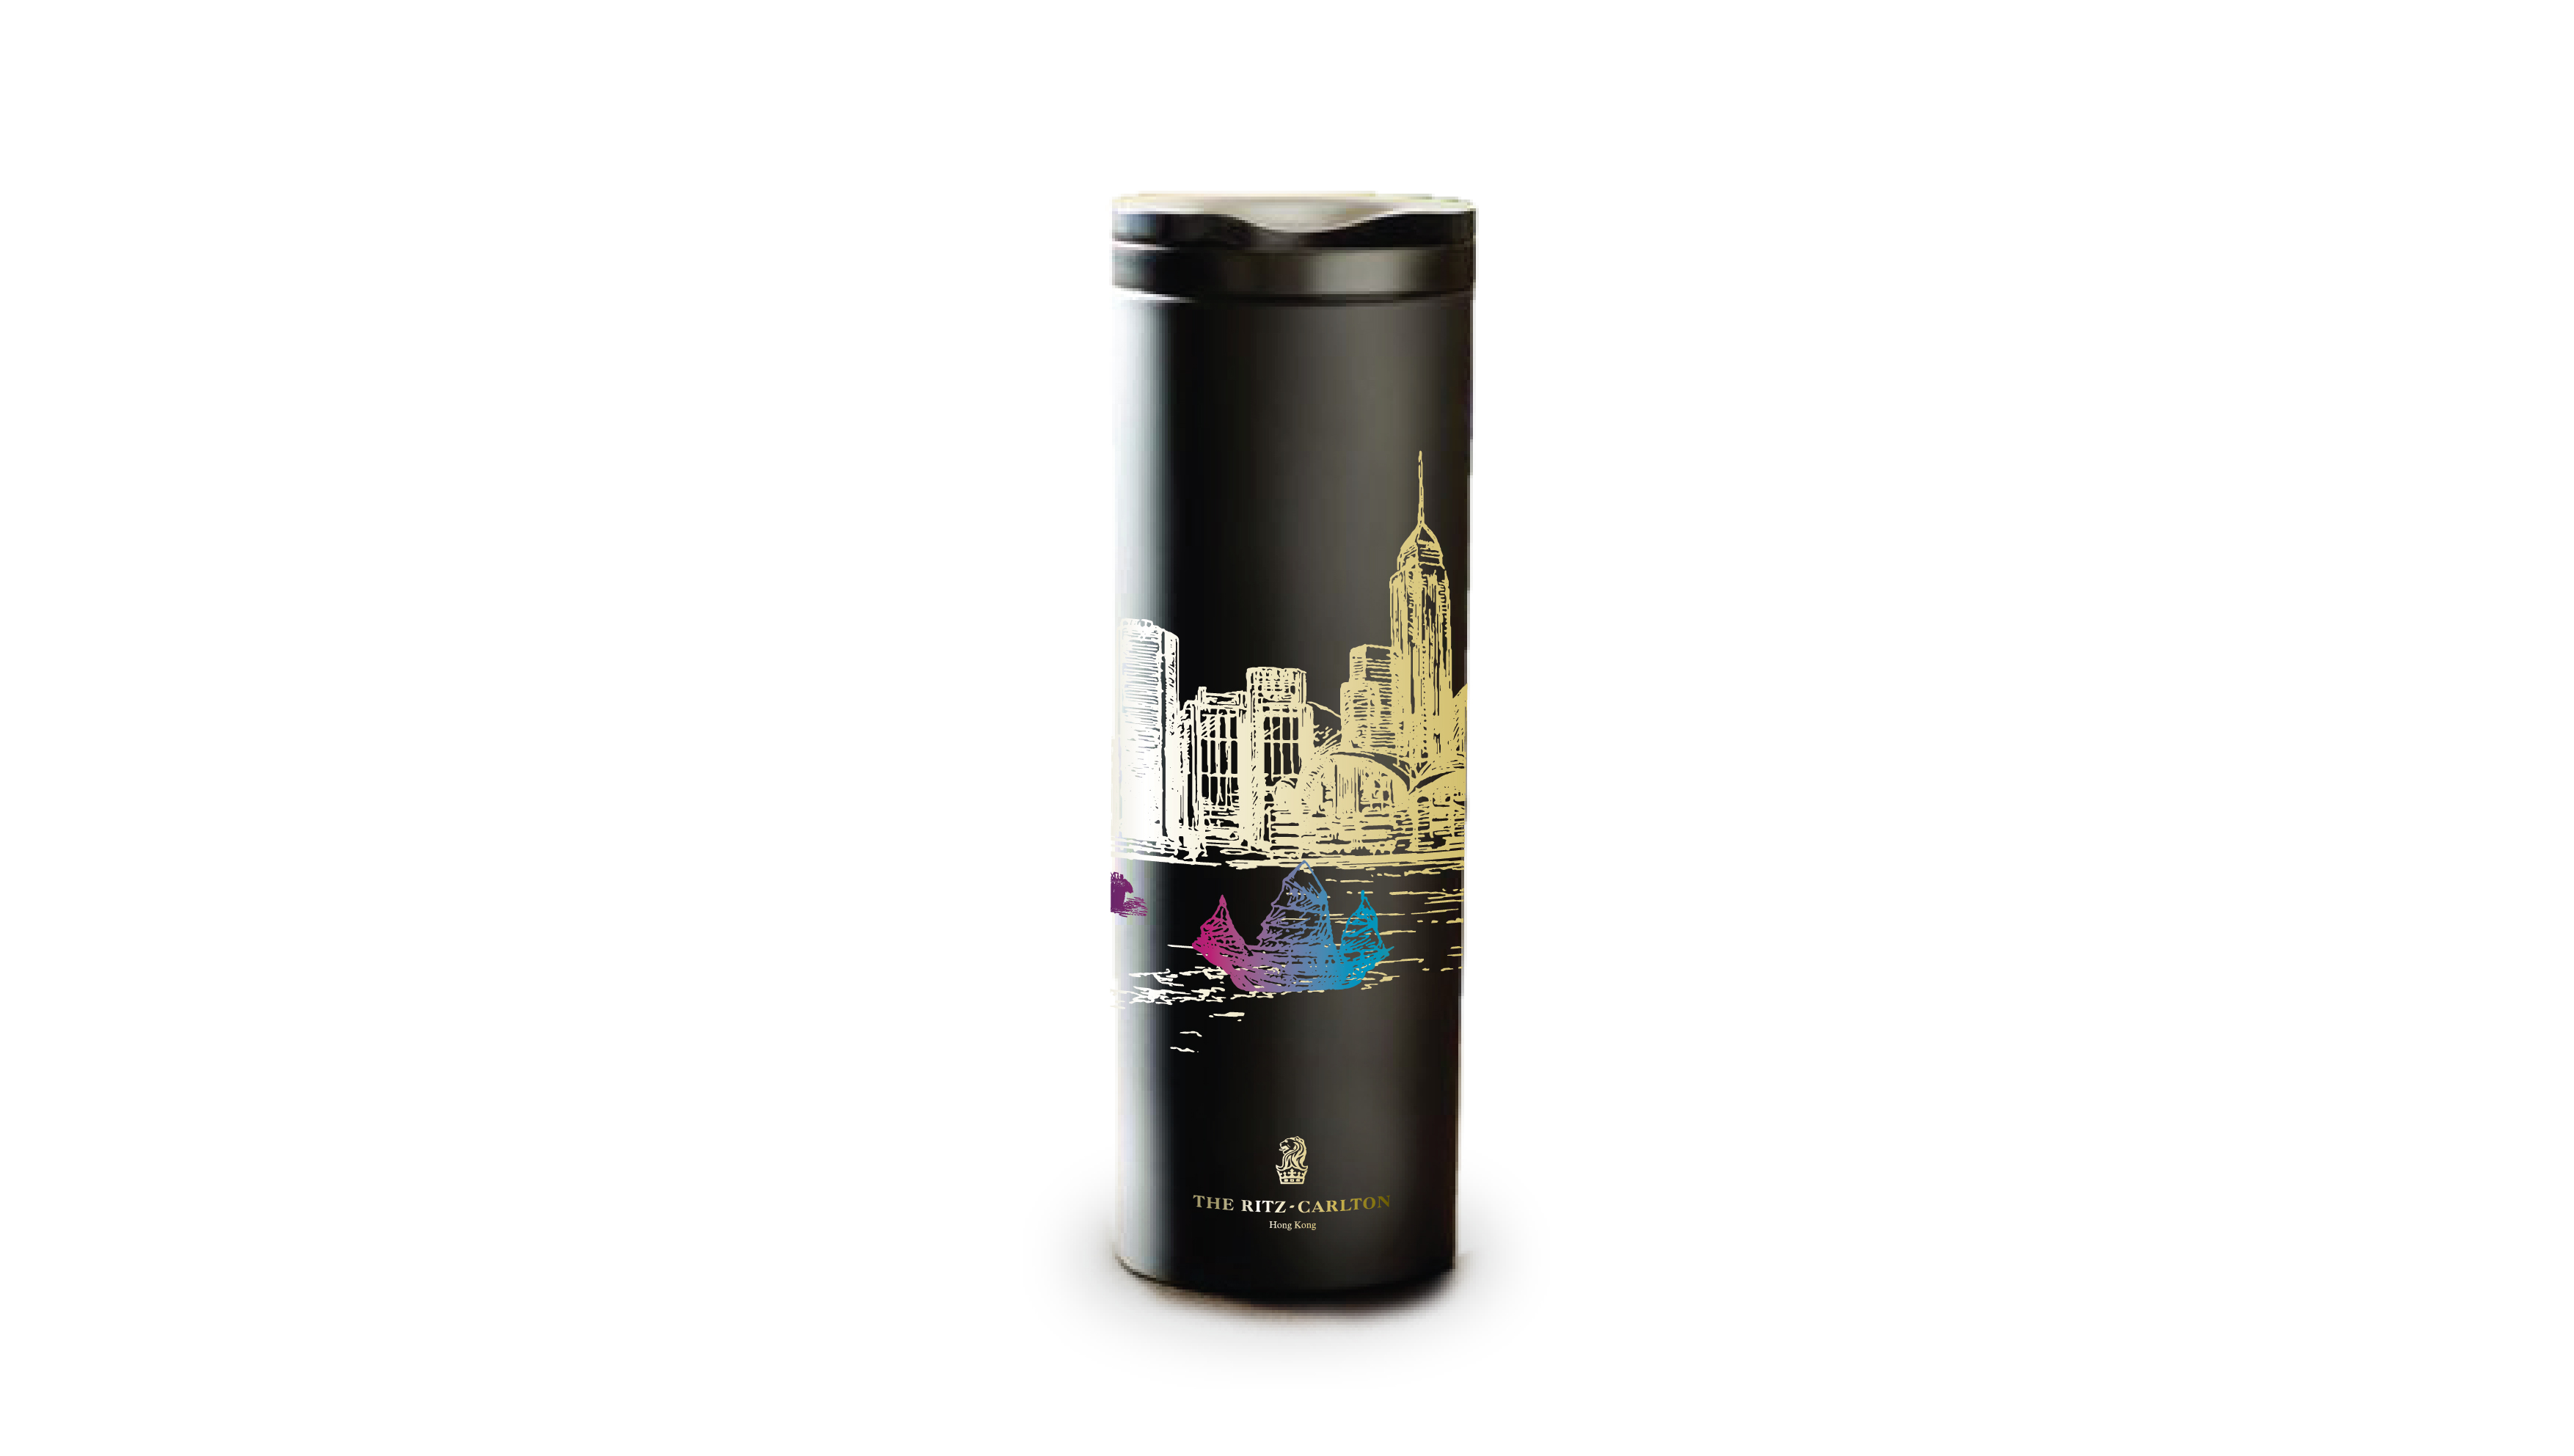 Set of Gifts & Premium design for Ritz-Carlton that show the brand images & local culture